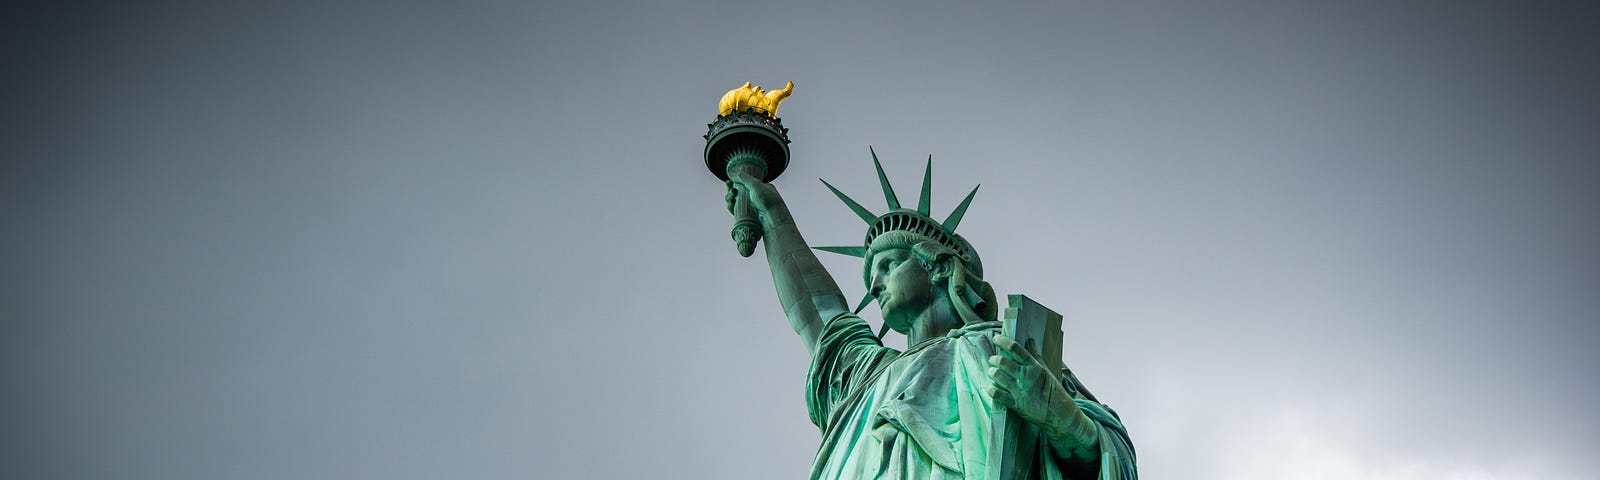 Photo of the Statue of Liberty by Jason Krieger, via Unsplash, against a grey backdrop